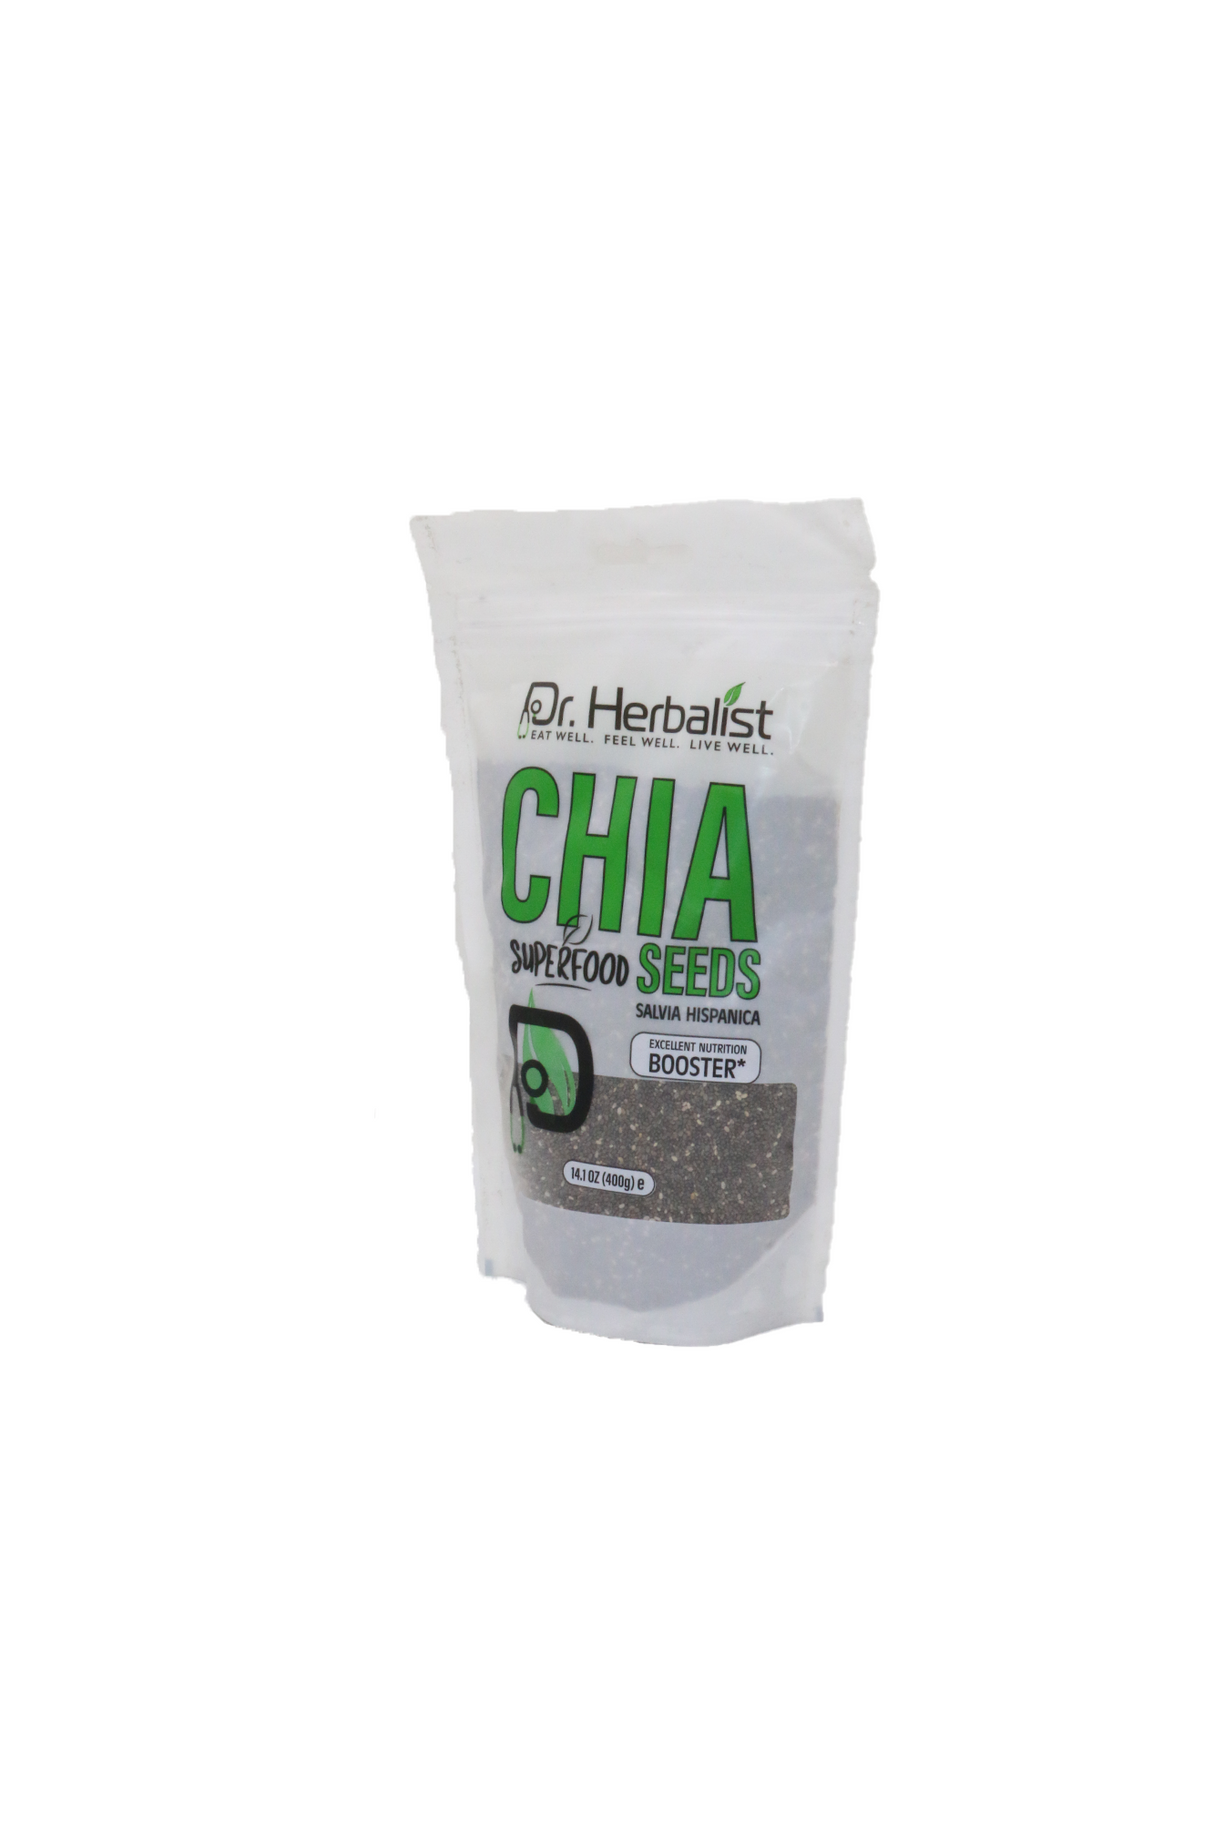 dr herbalist chia seeds 400g pouch